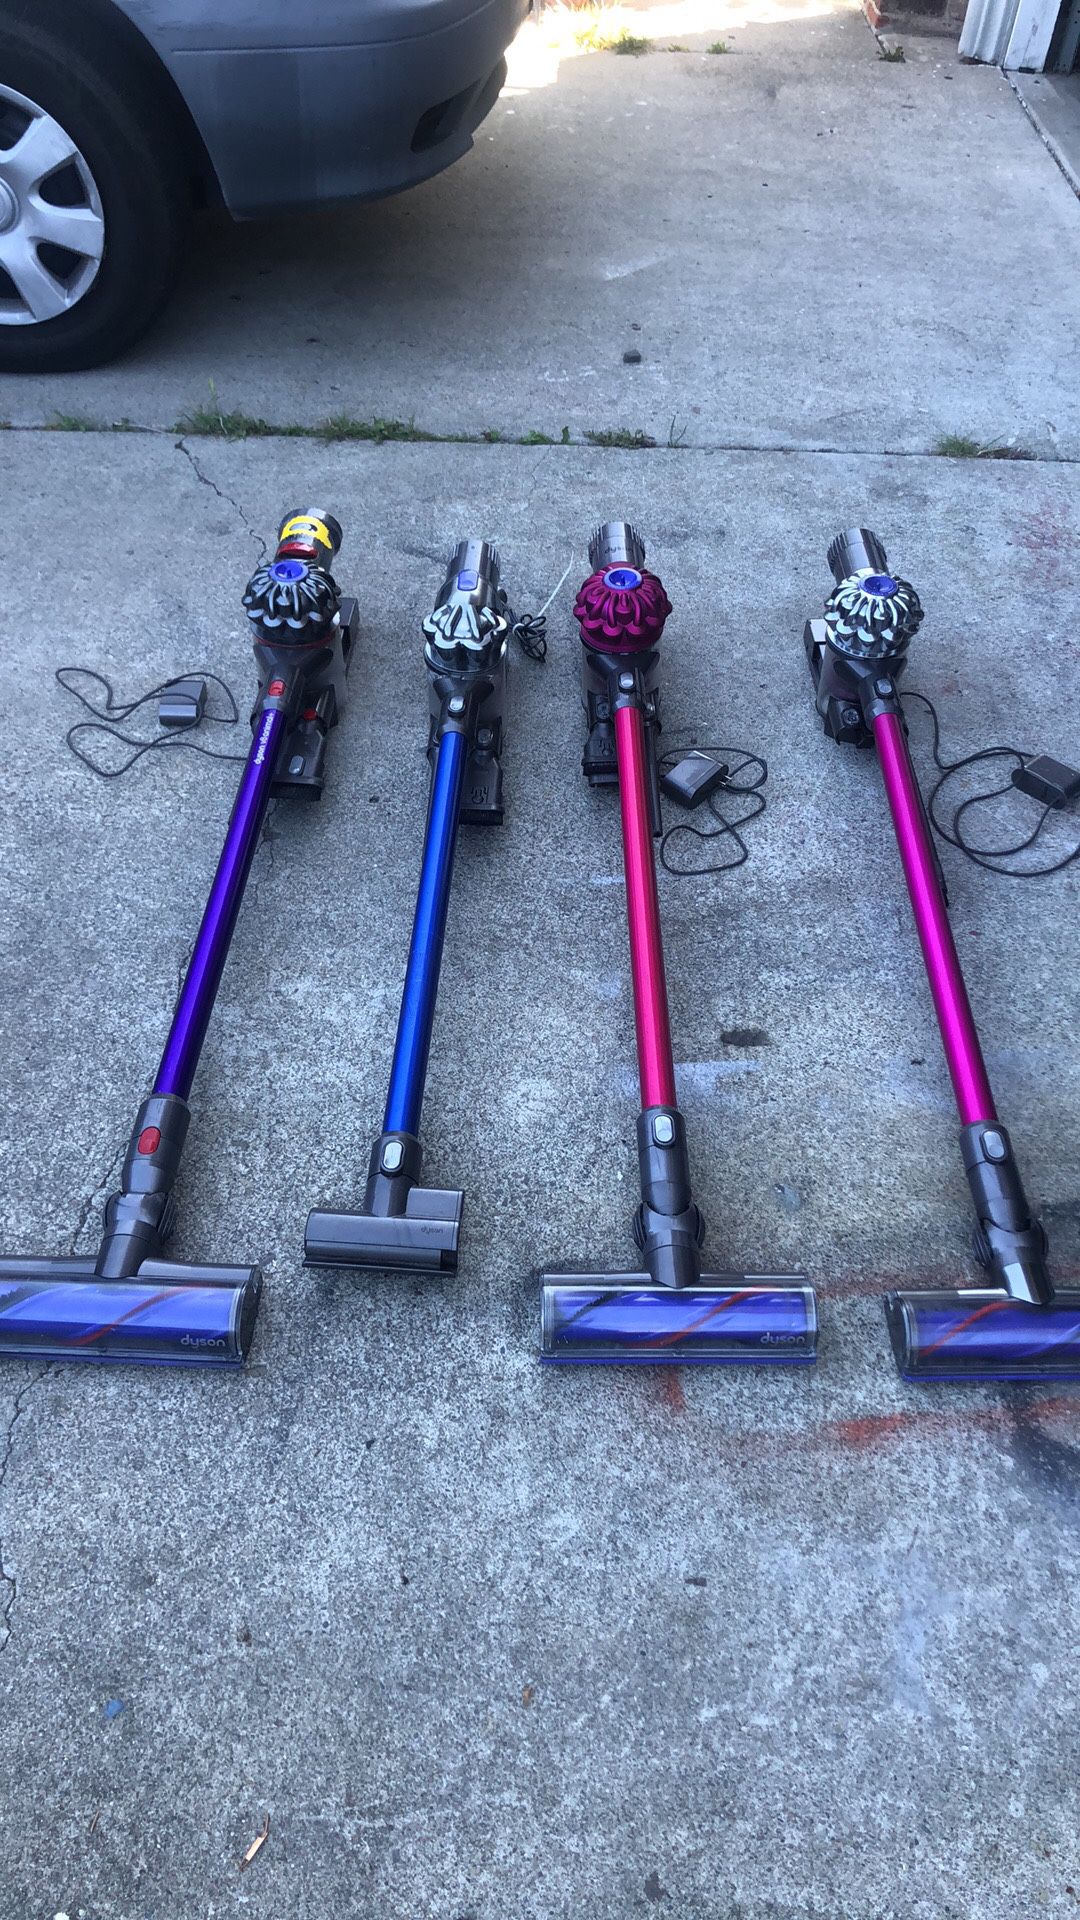 Dyson Cordless Vacuum Cleaner Tested Working Perfect Starting $100 Up To $175 